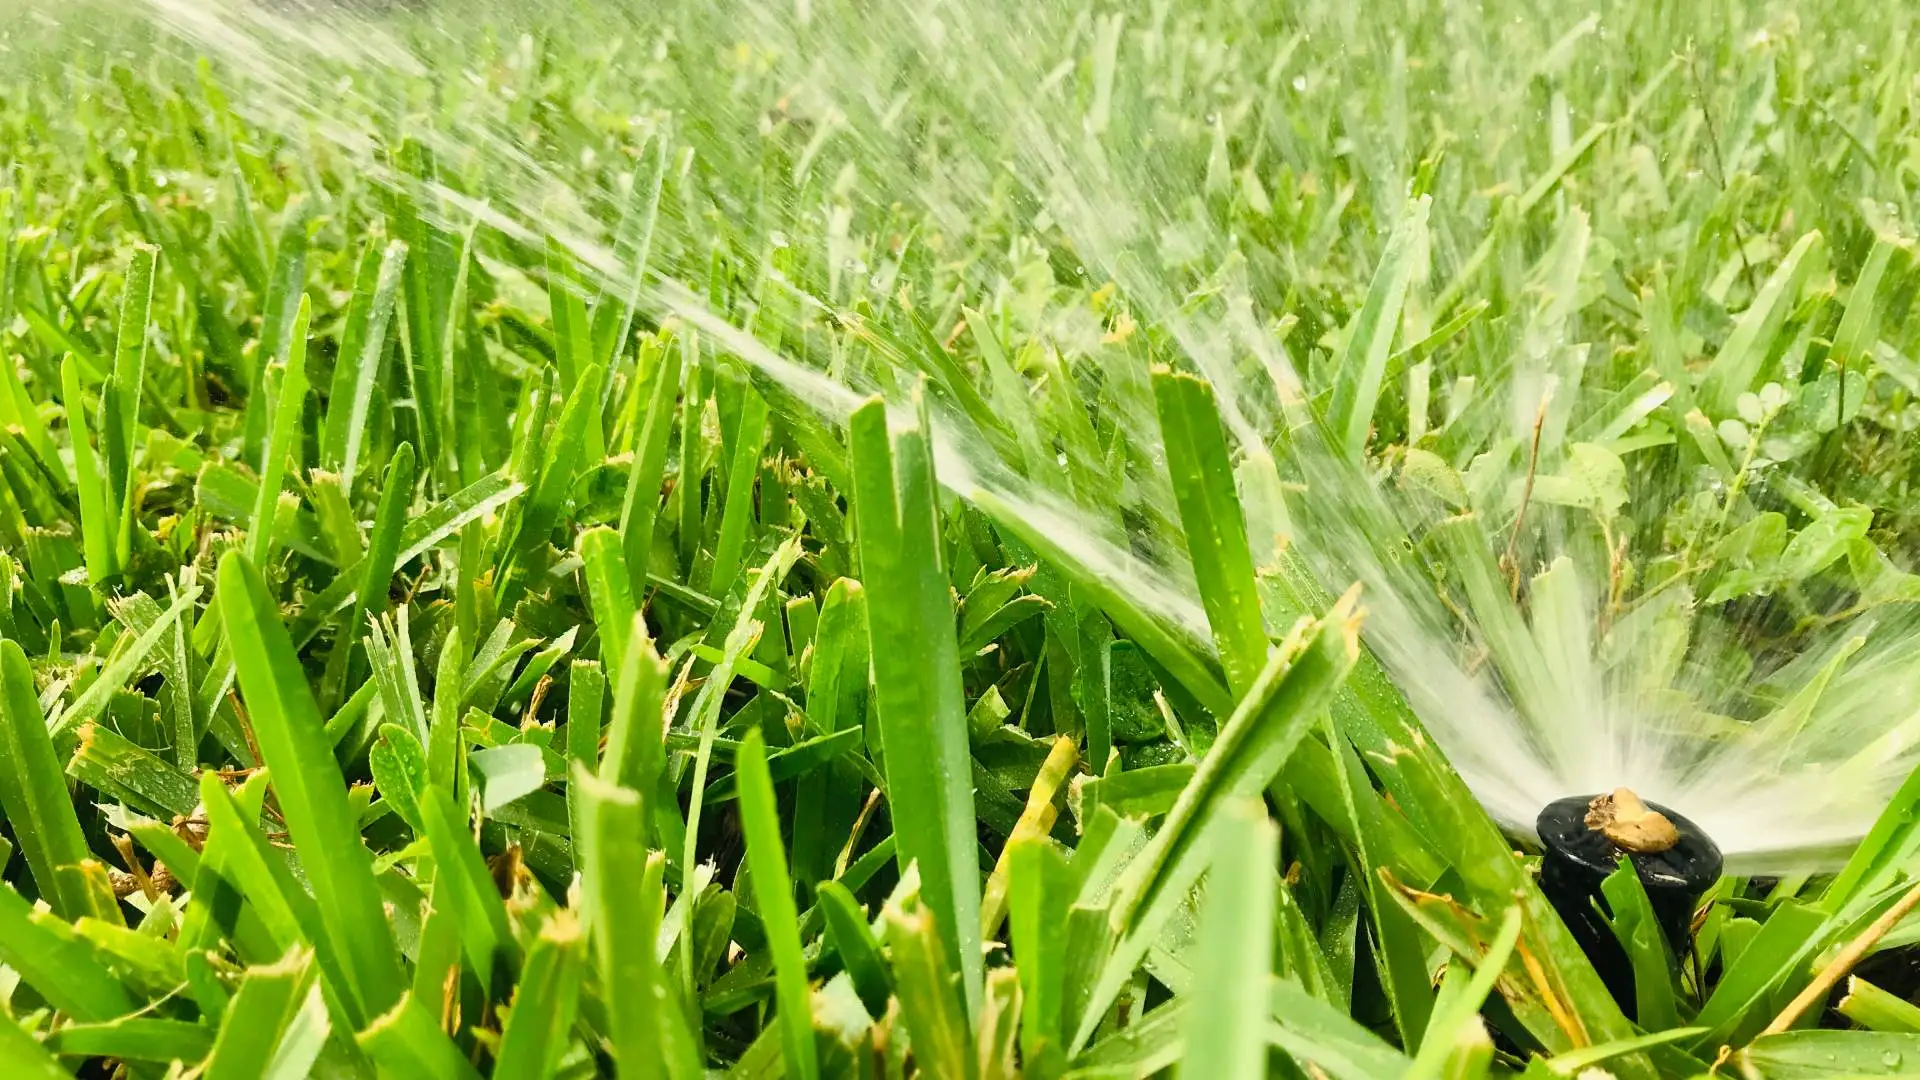 Sprinkler system watering a green lawn in Waukee, IA.